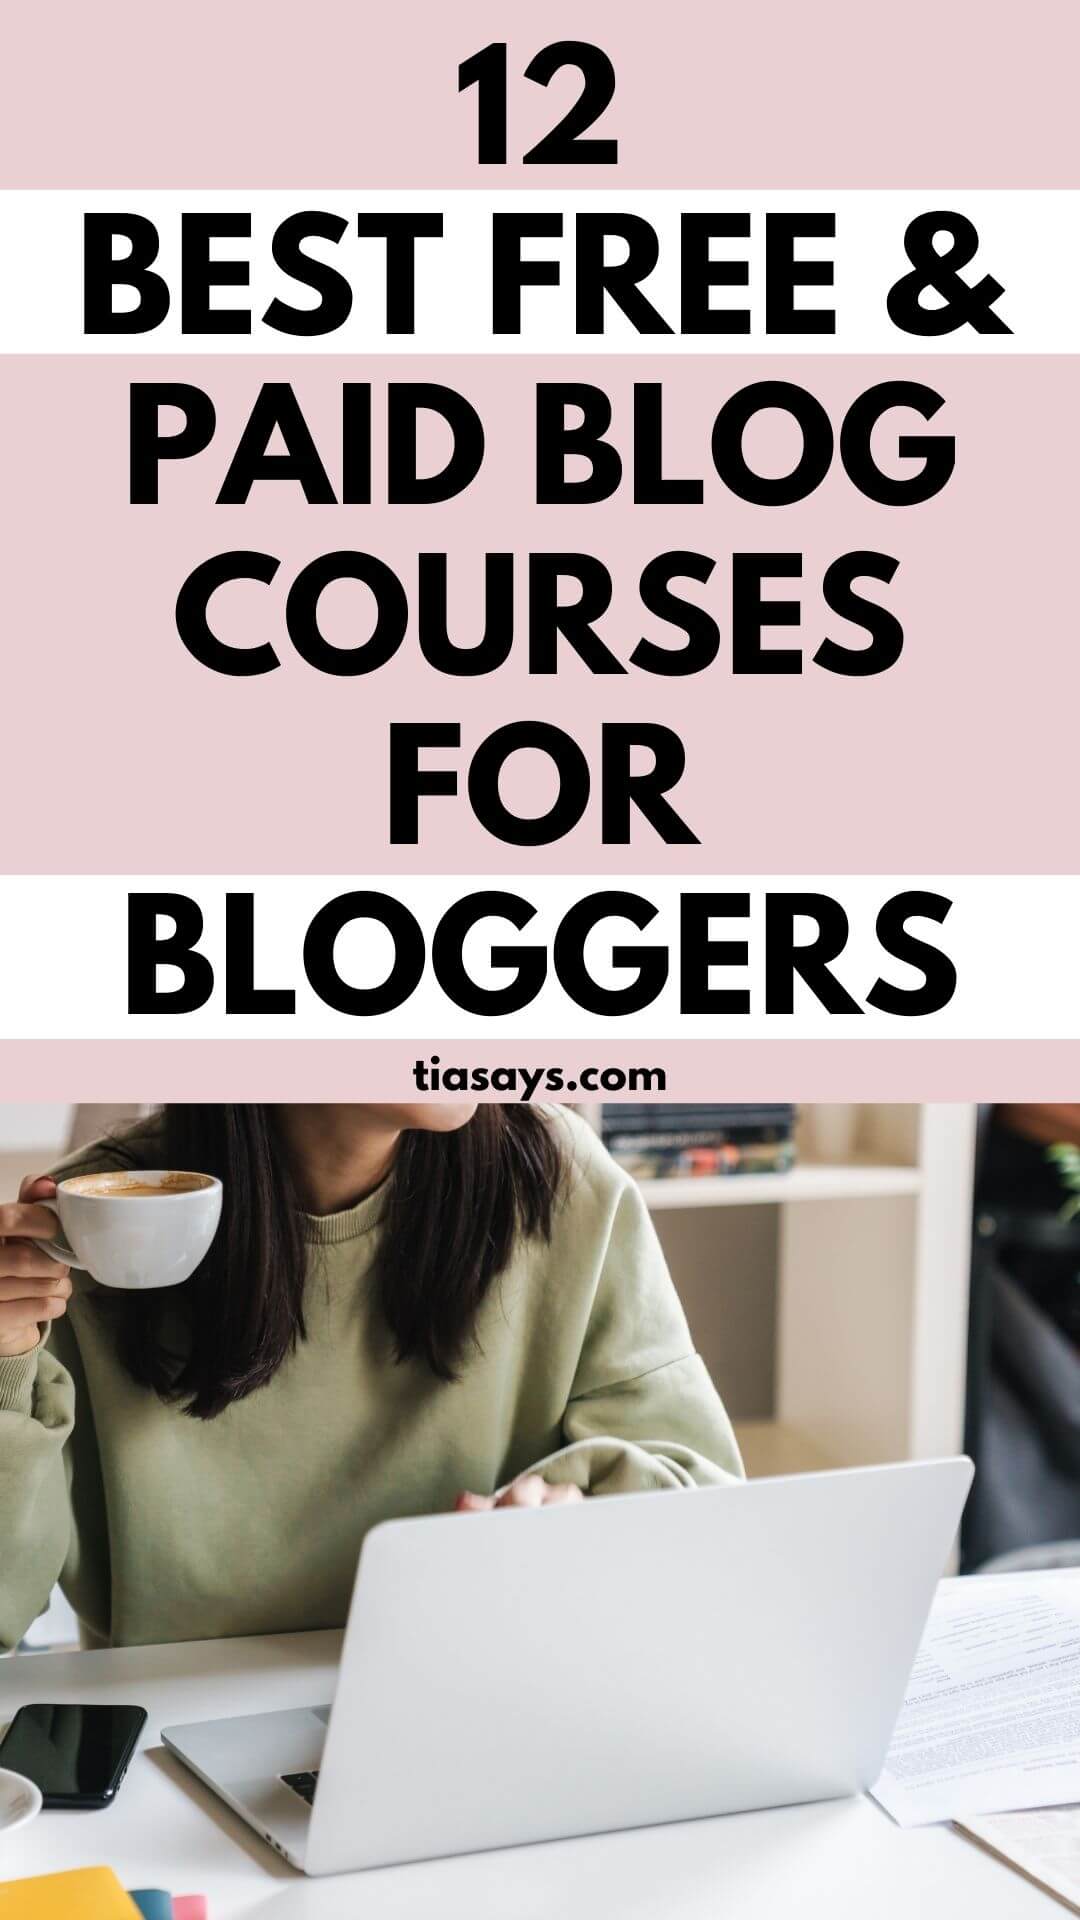 blogging courses for beginners